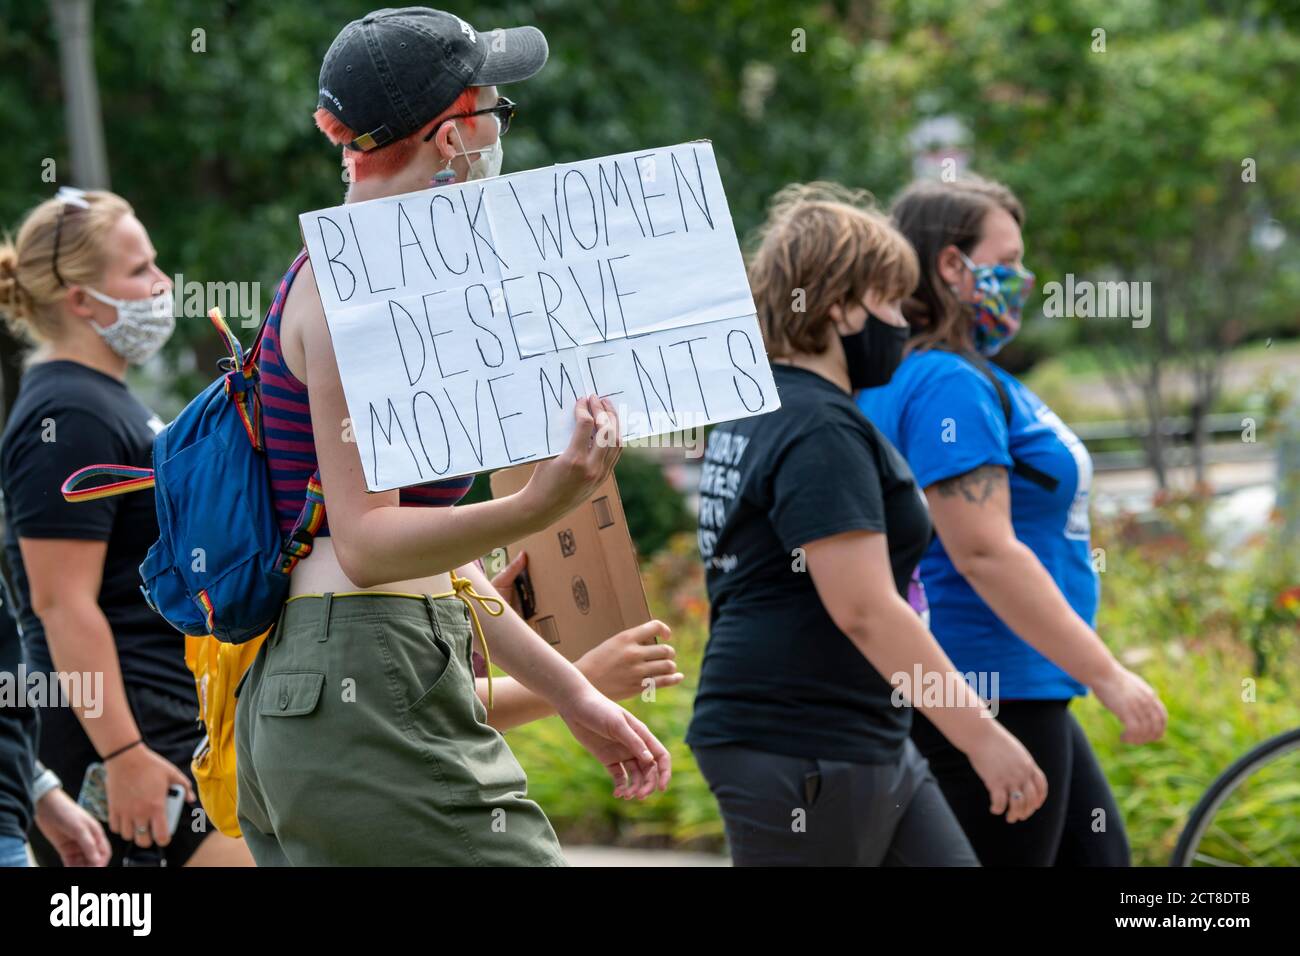 St. Paul, Minnesota. August 22, 2020. Youth march and rally to end violence.  Protester holding a black women deserve movements sign at the rally. Stock Photo